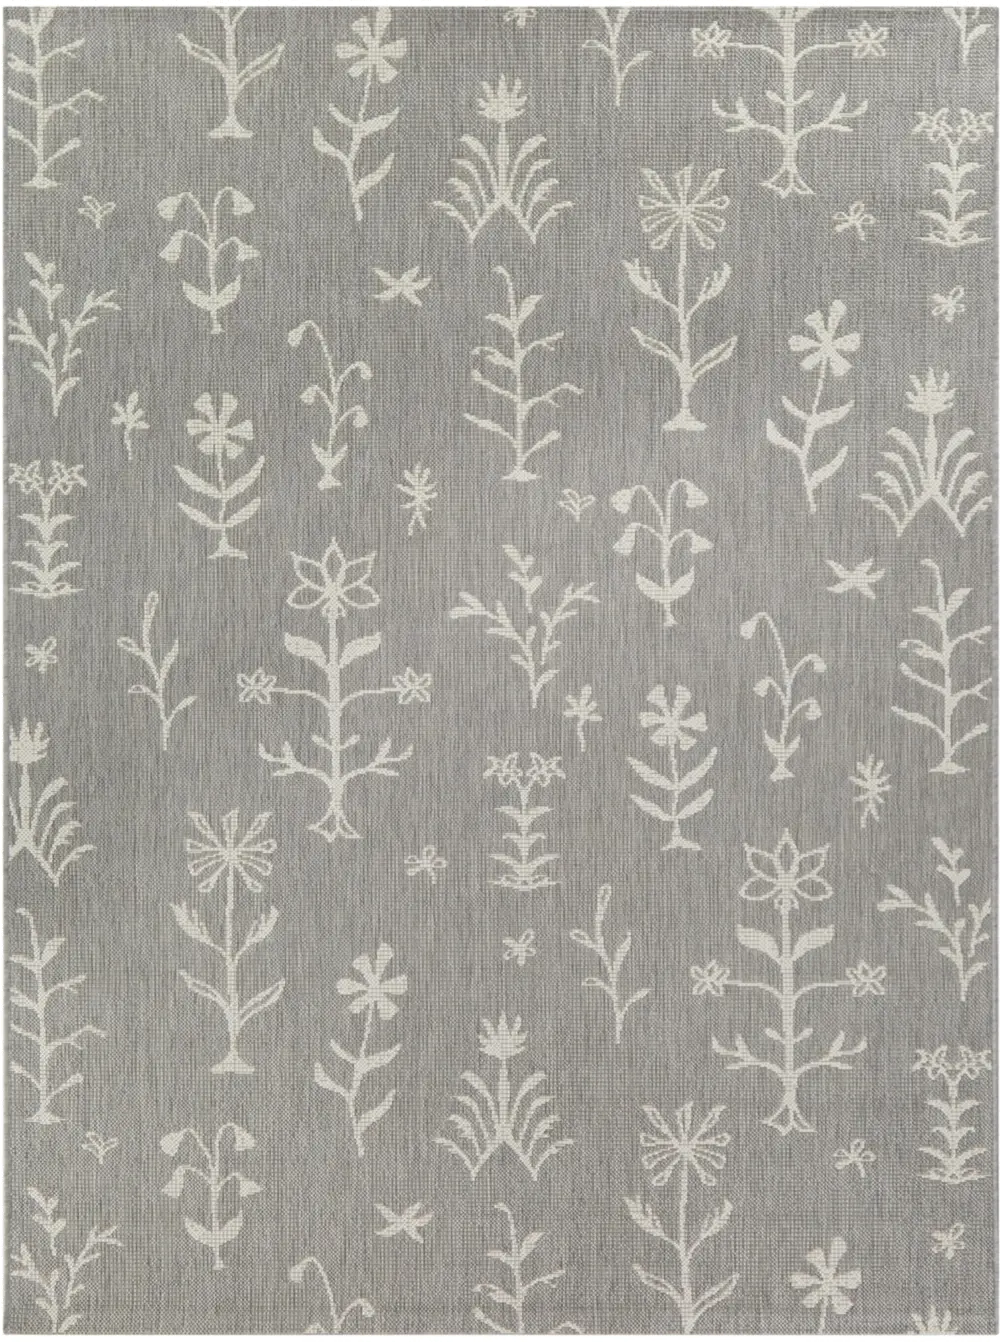 Rosemary 8 x 10 Floral Botanical Outdoor Patio Rug-1